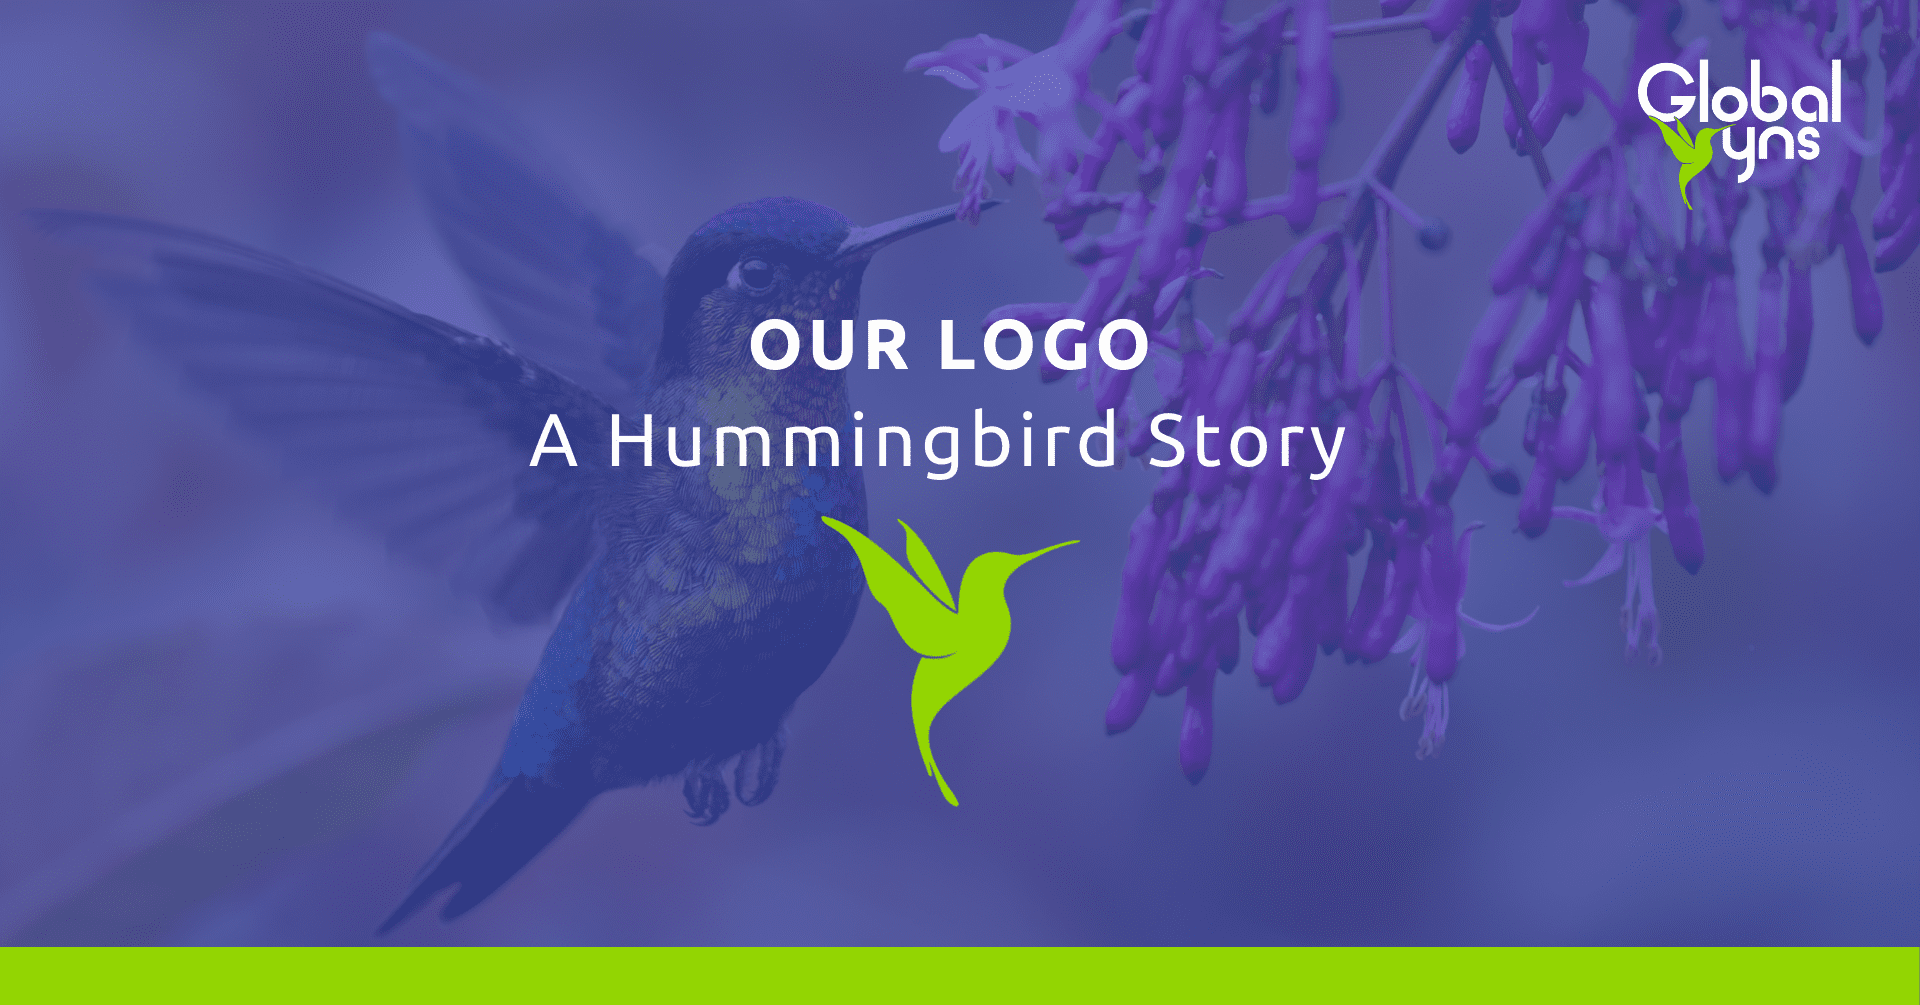 Our Hummingbird Story